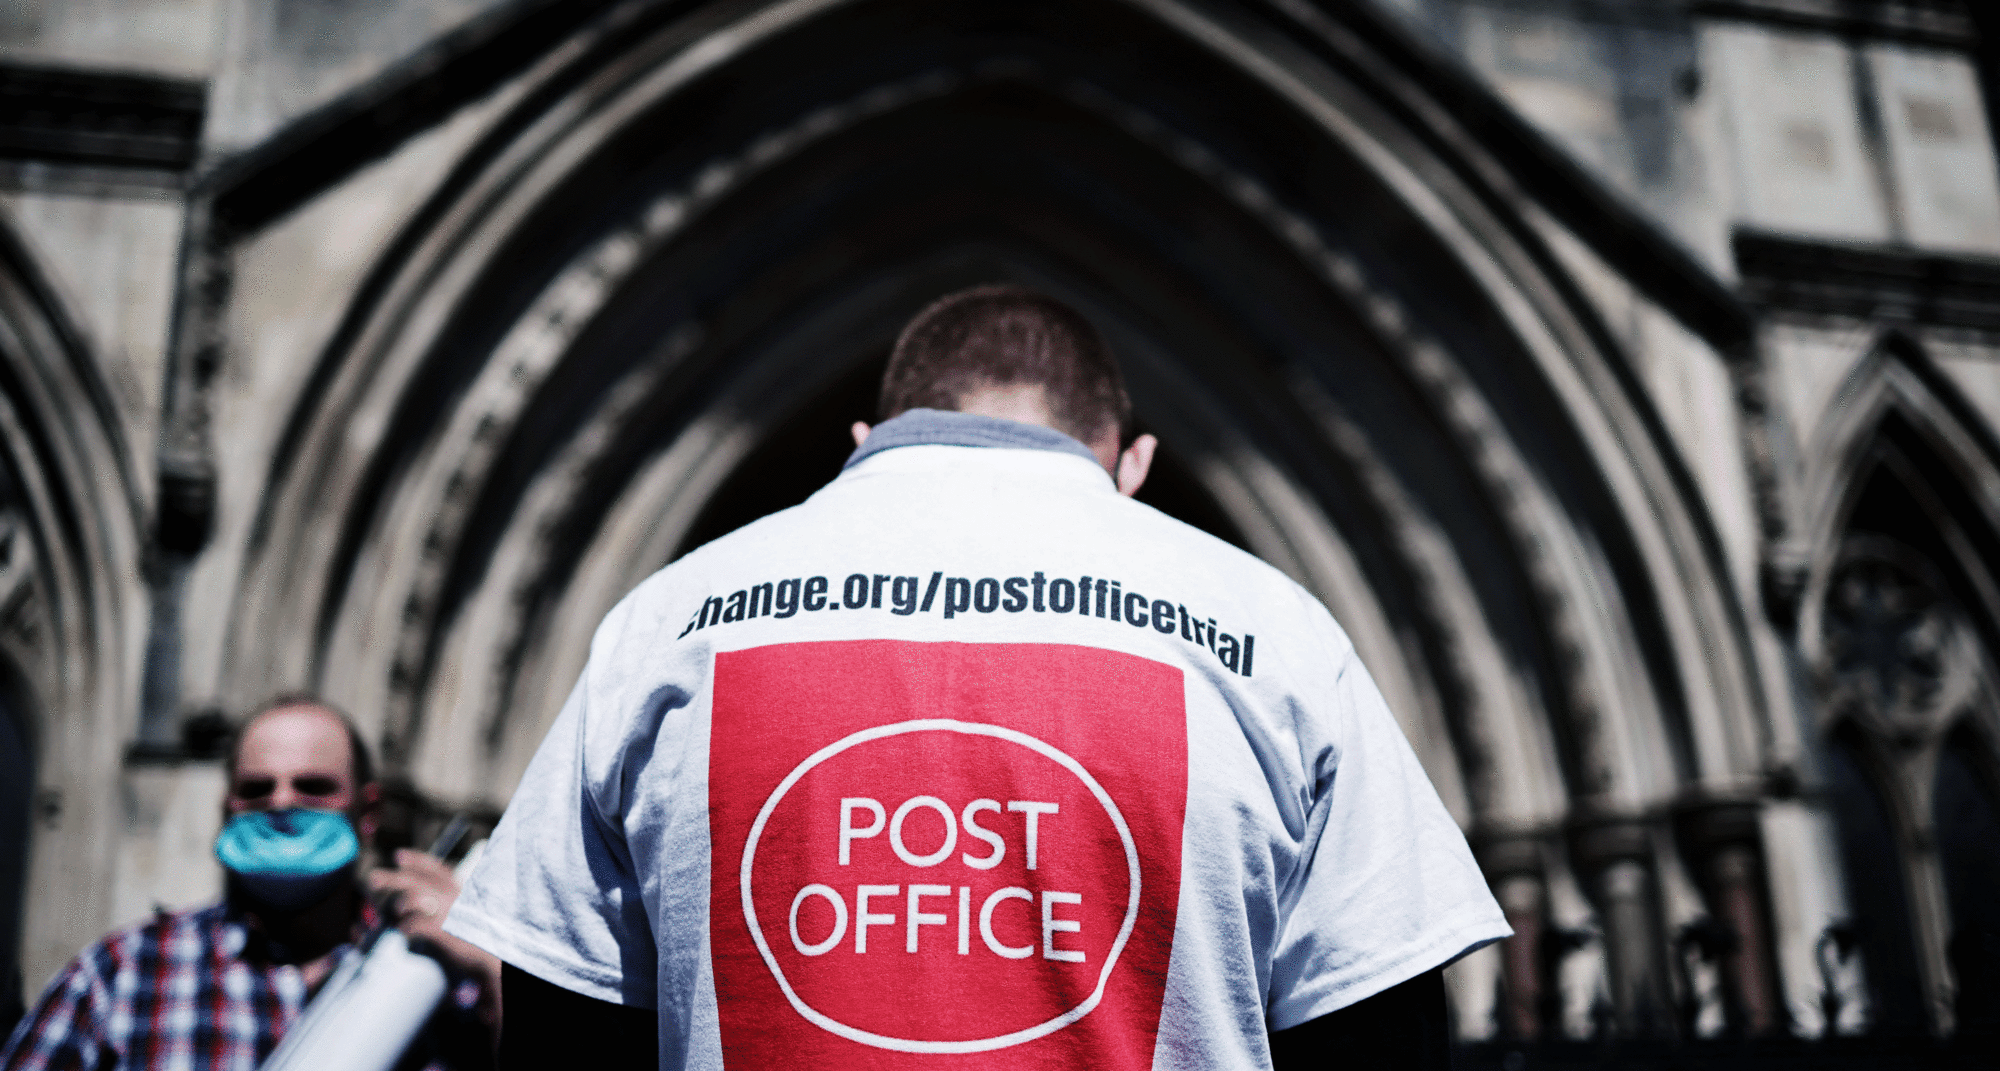 The Post Office scandal proves the rule of law is vital for a functioning economy